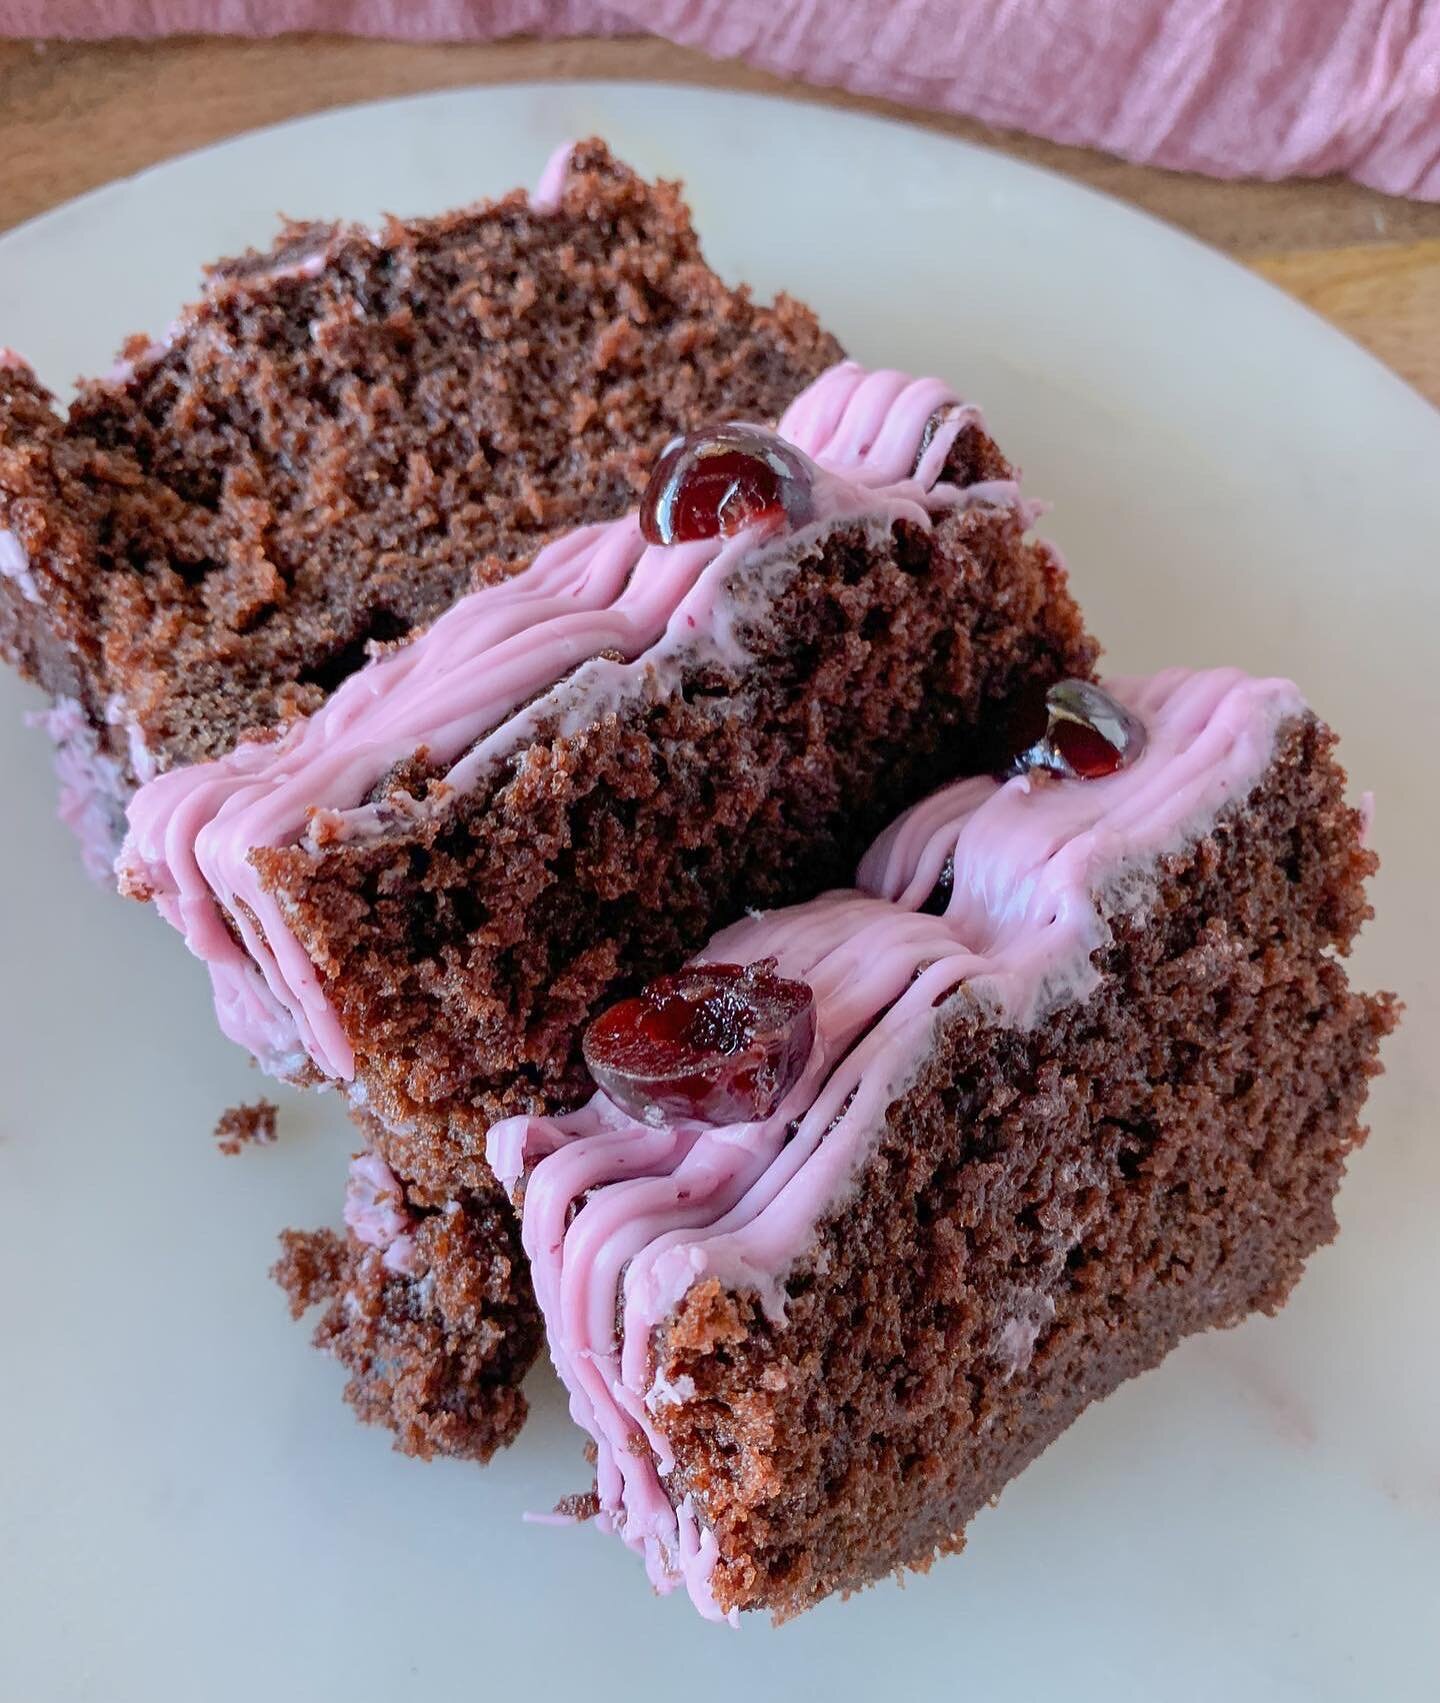 Friends, we highly recommend not trying this new Chocolate Cherry Loaf Cake unless you&rsquo;re okay with your life being changed for the better.
Don&rsquo;t say we didn&rsquo;t warn (encourage) you!

.
.
.
.
.
#gourmandise&nbsp;#slccoffee&nbsp;#shop